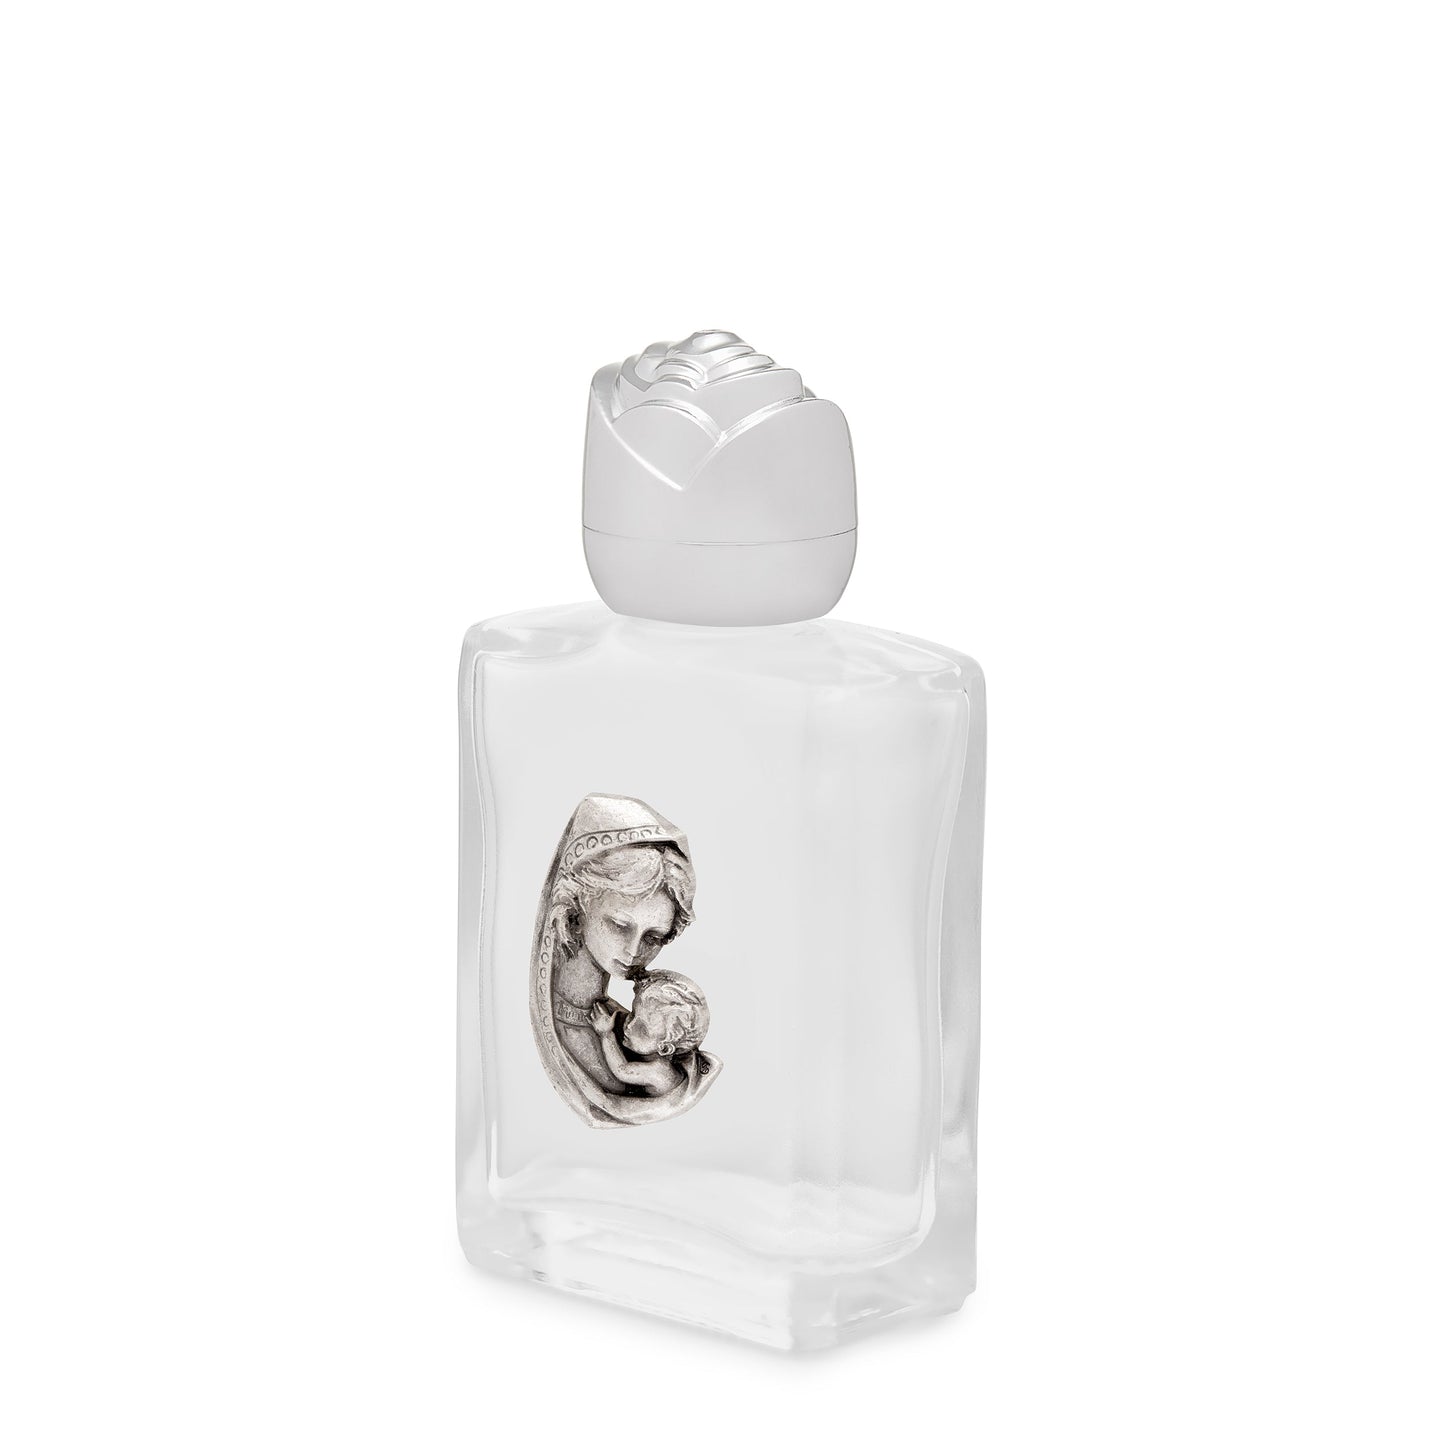 MONDO CATTOLICO Bottle of 10 ml with Mary and Jesus Child